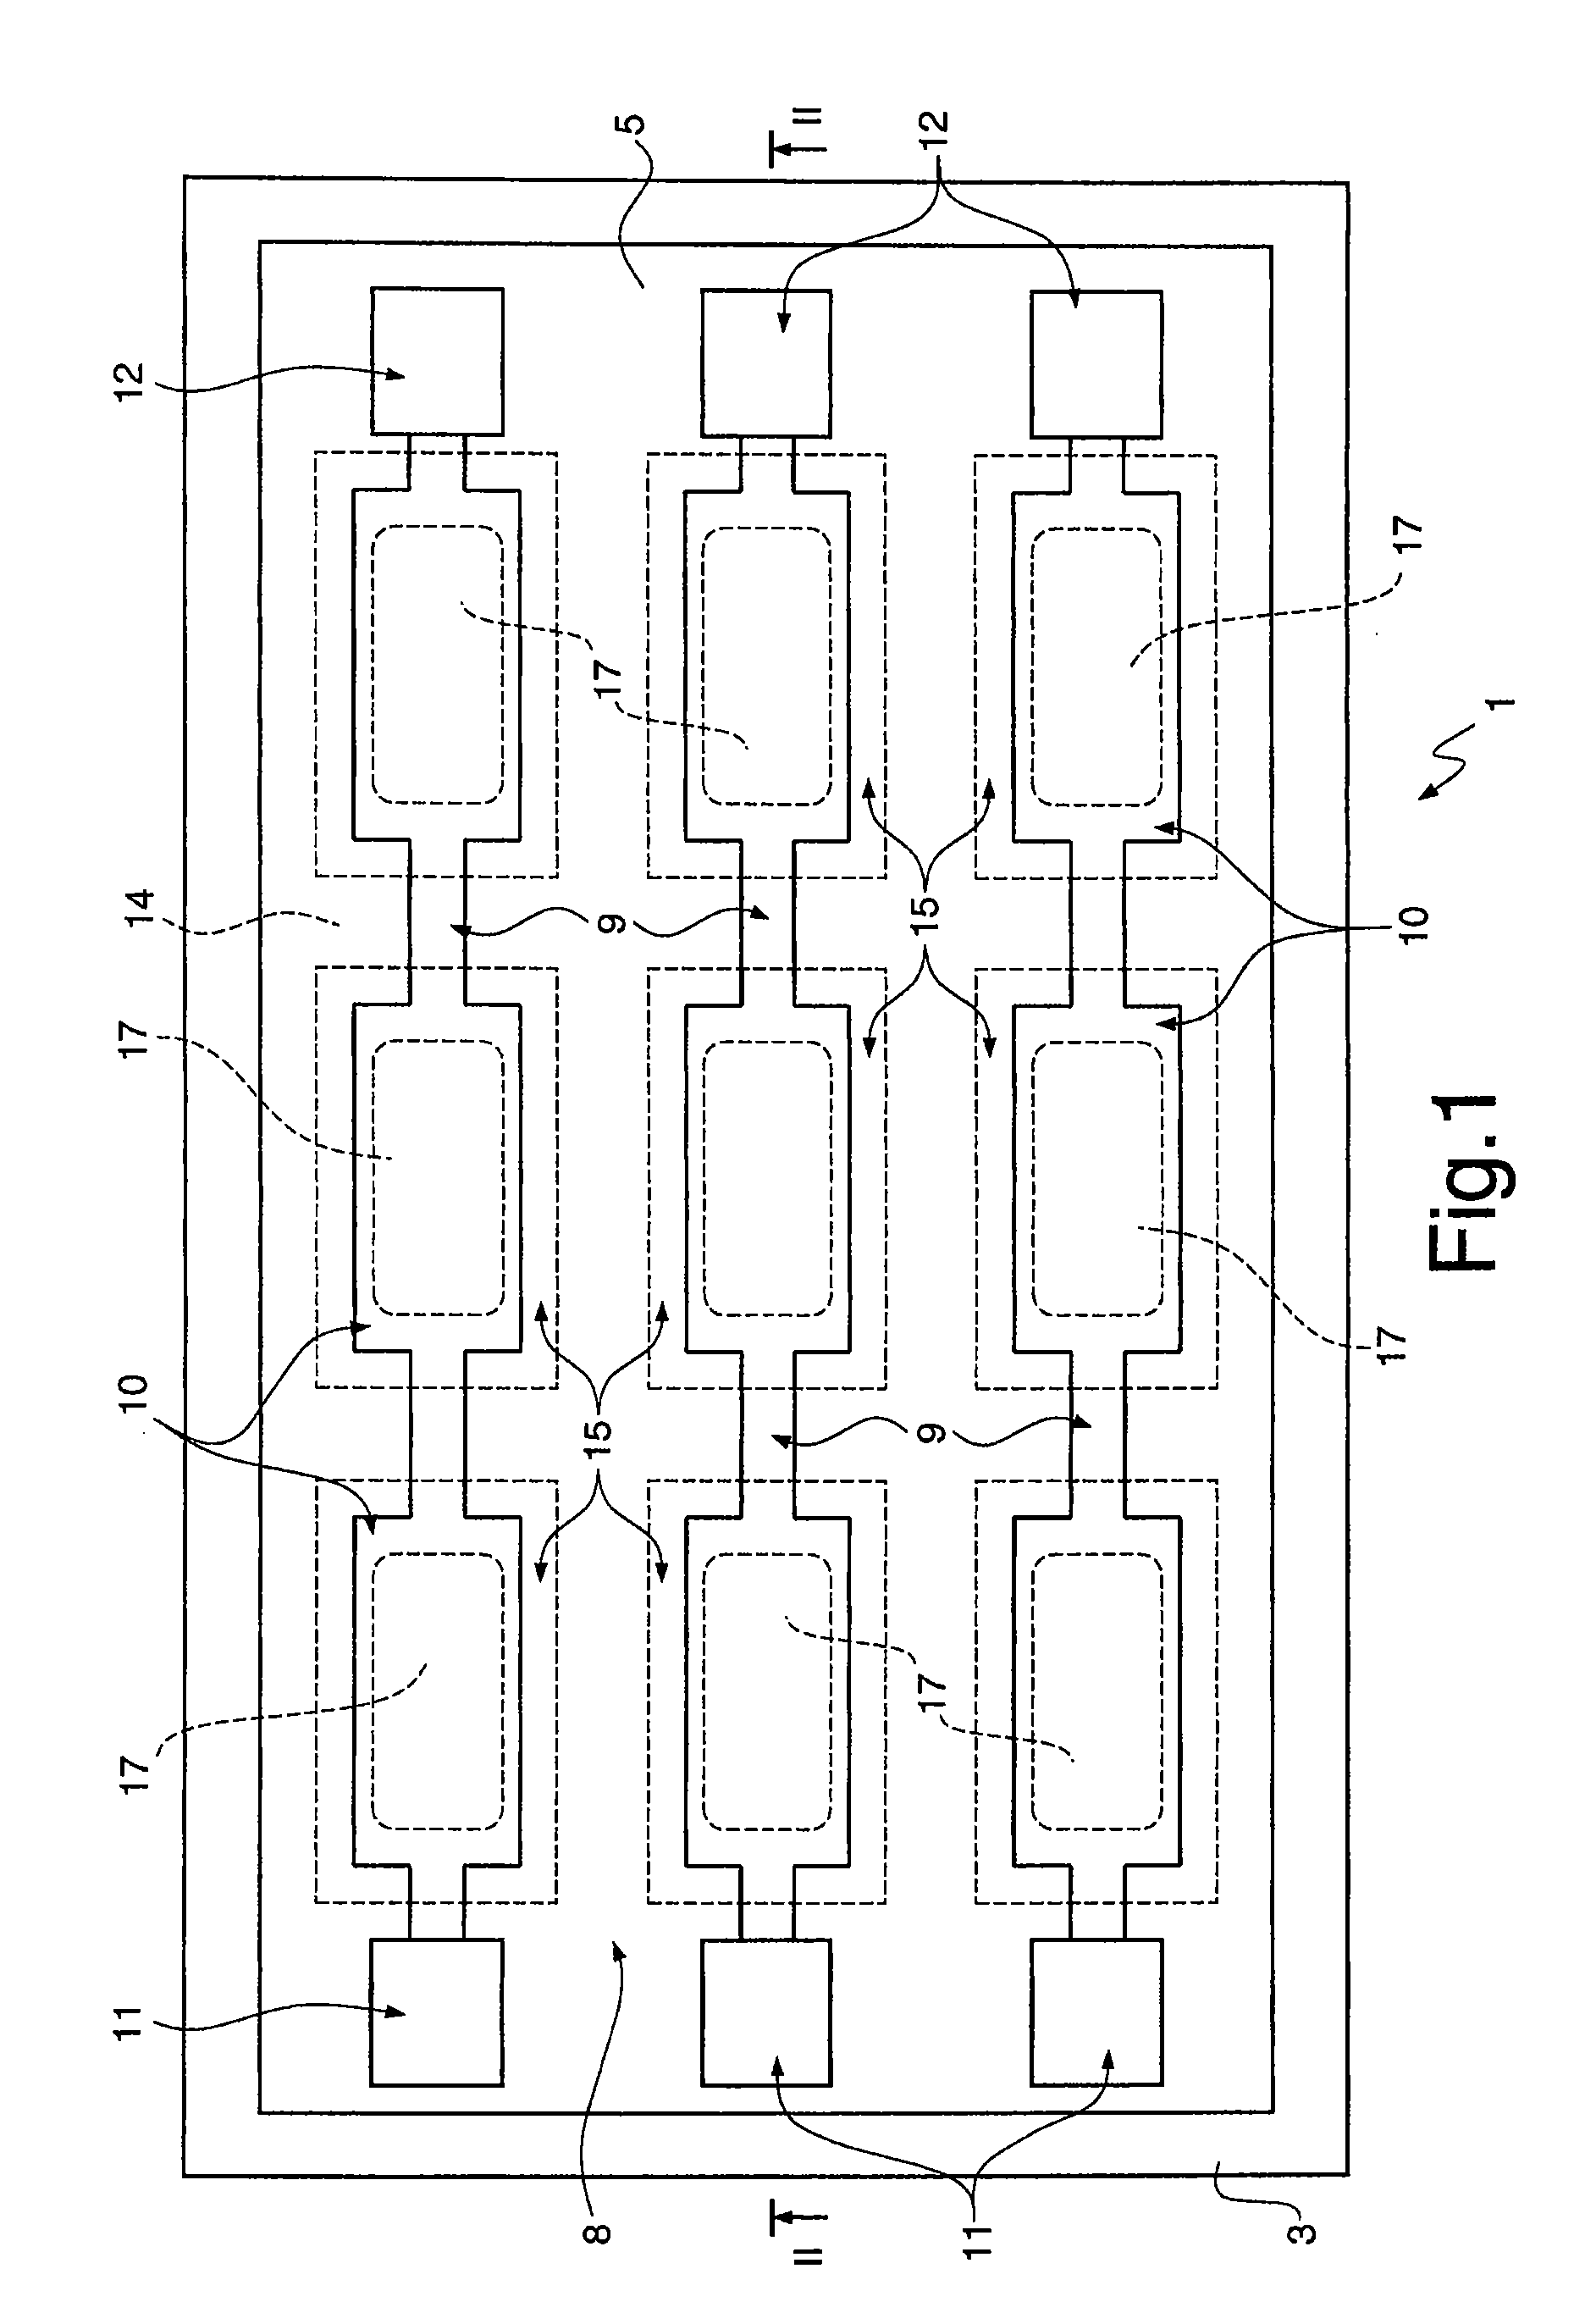 Self-sealing microreactor and method for carrying out a reaction